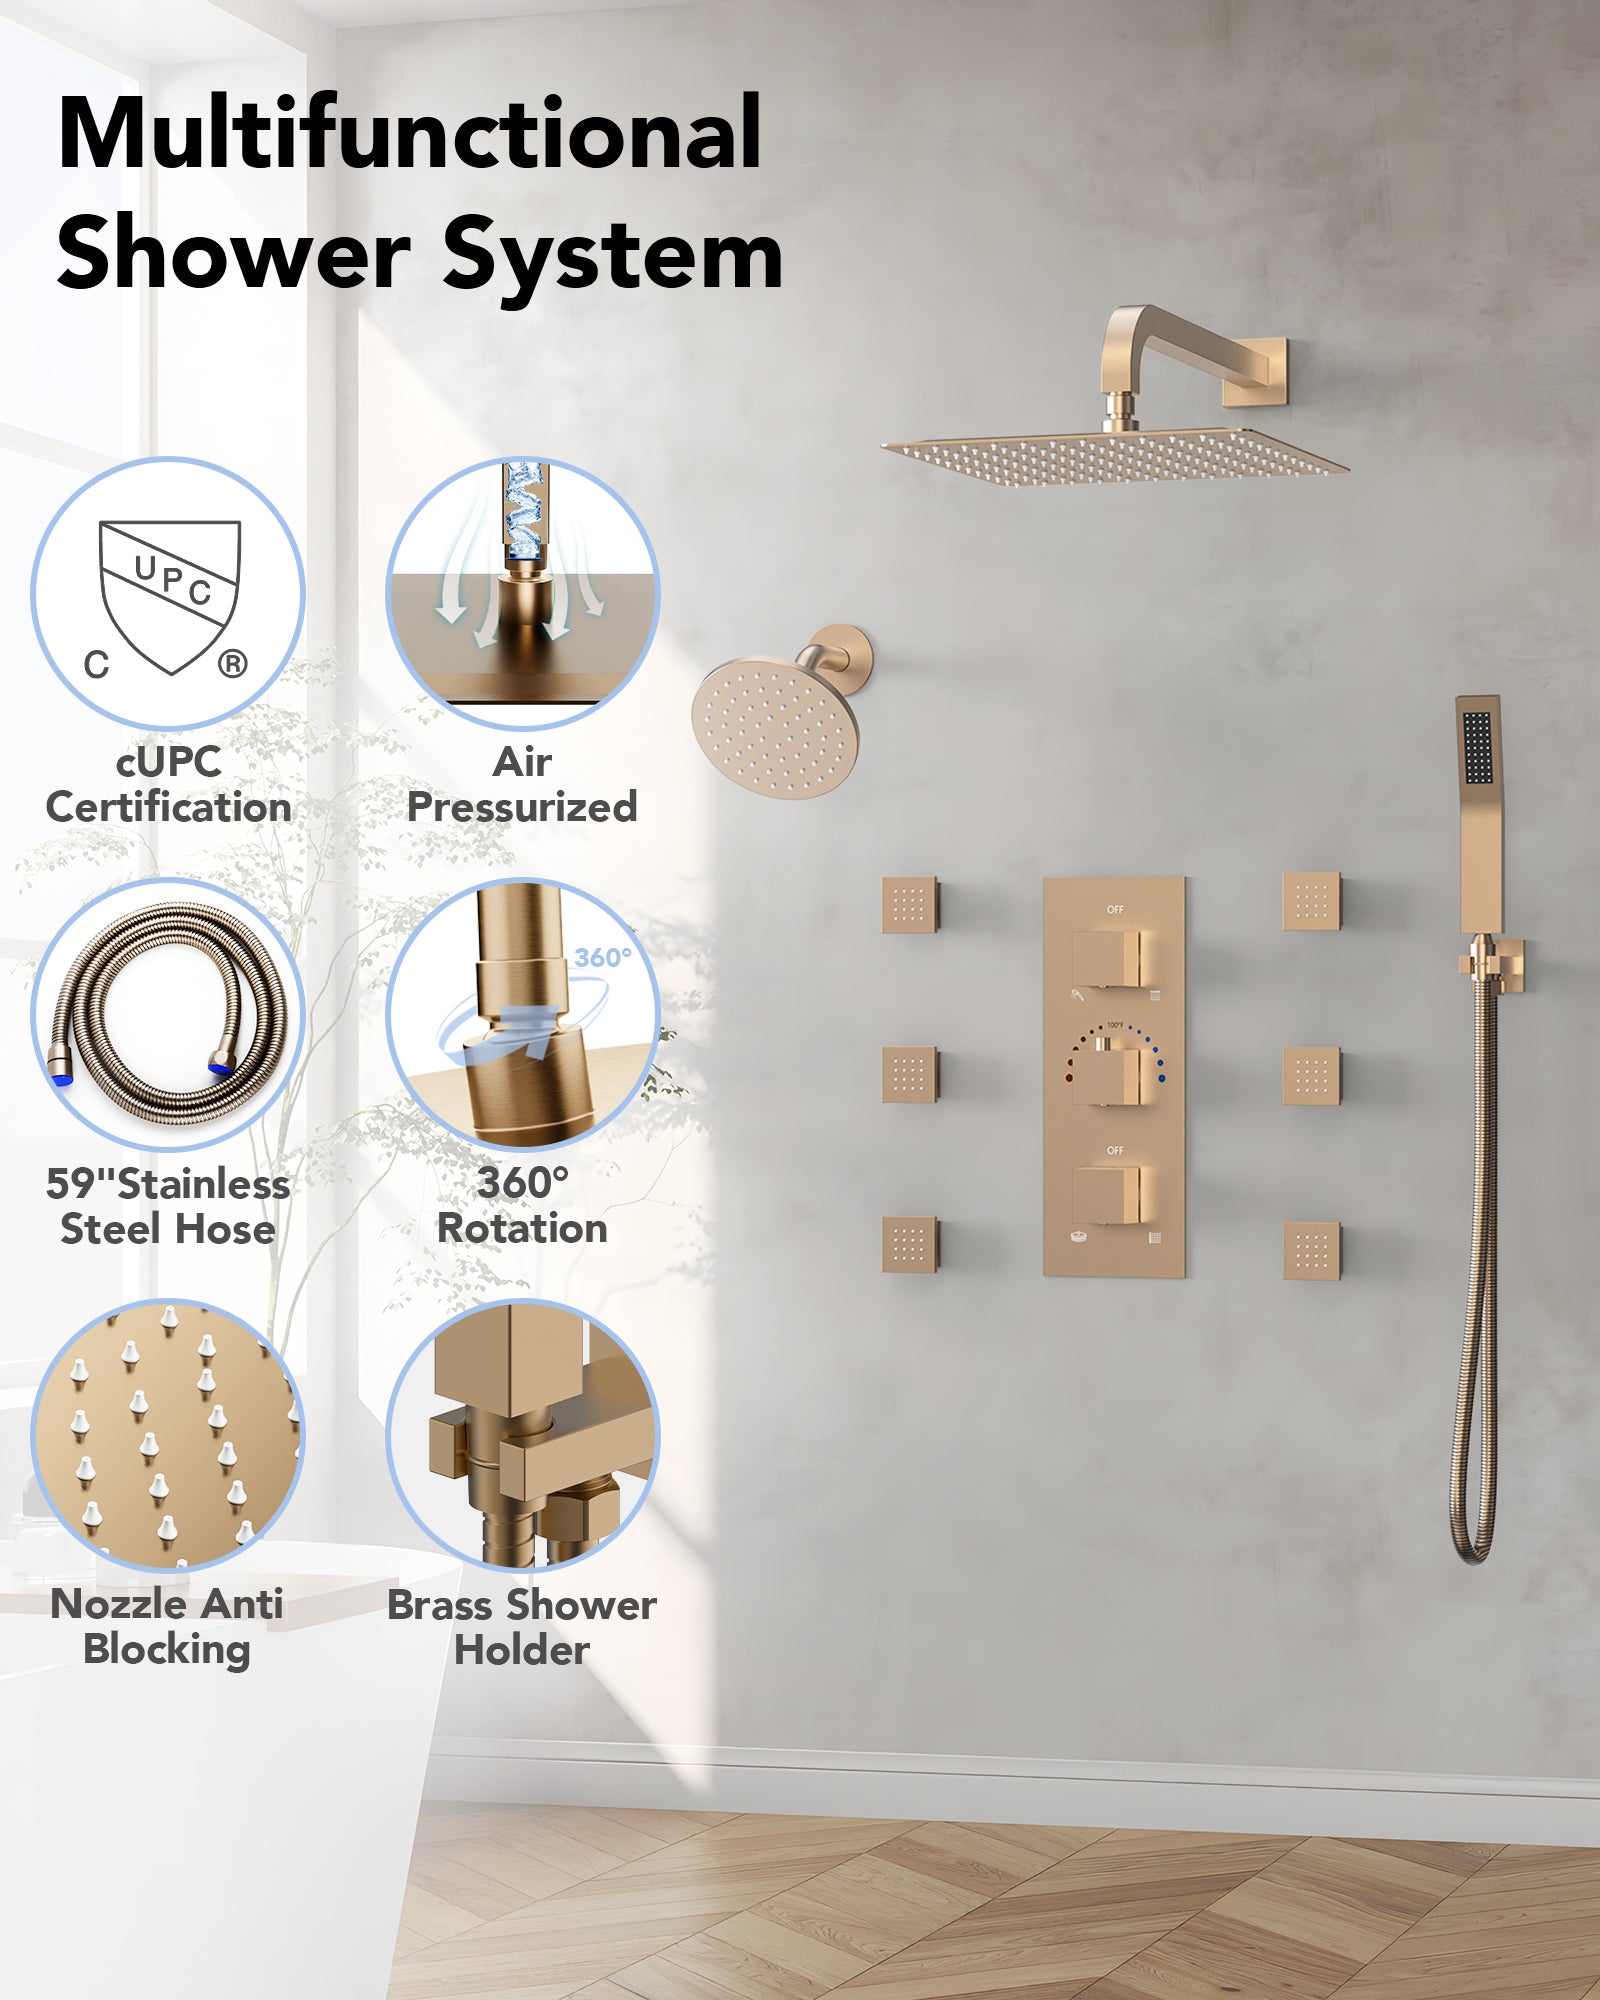 Complete shower system showcasing body massage jet features and full setup overview_jpg